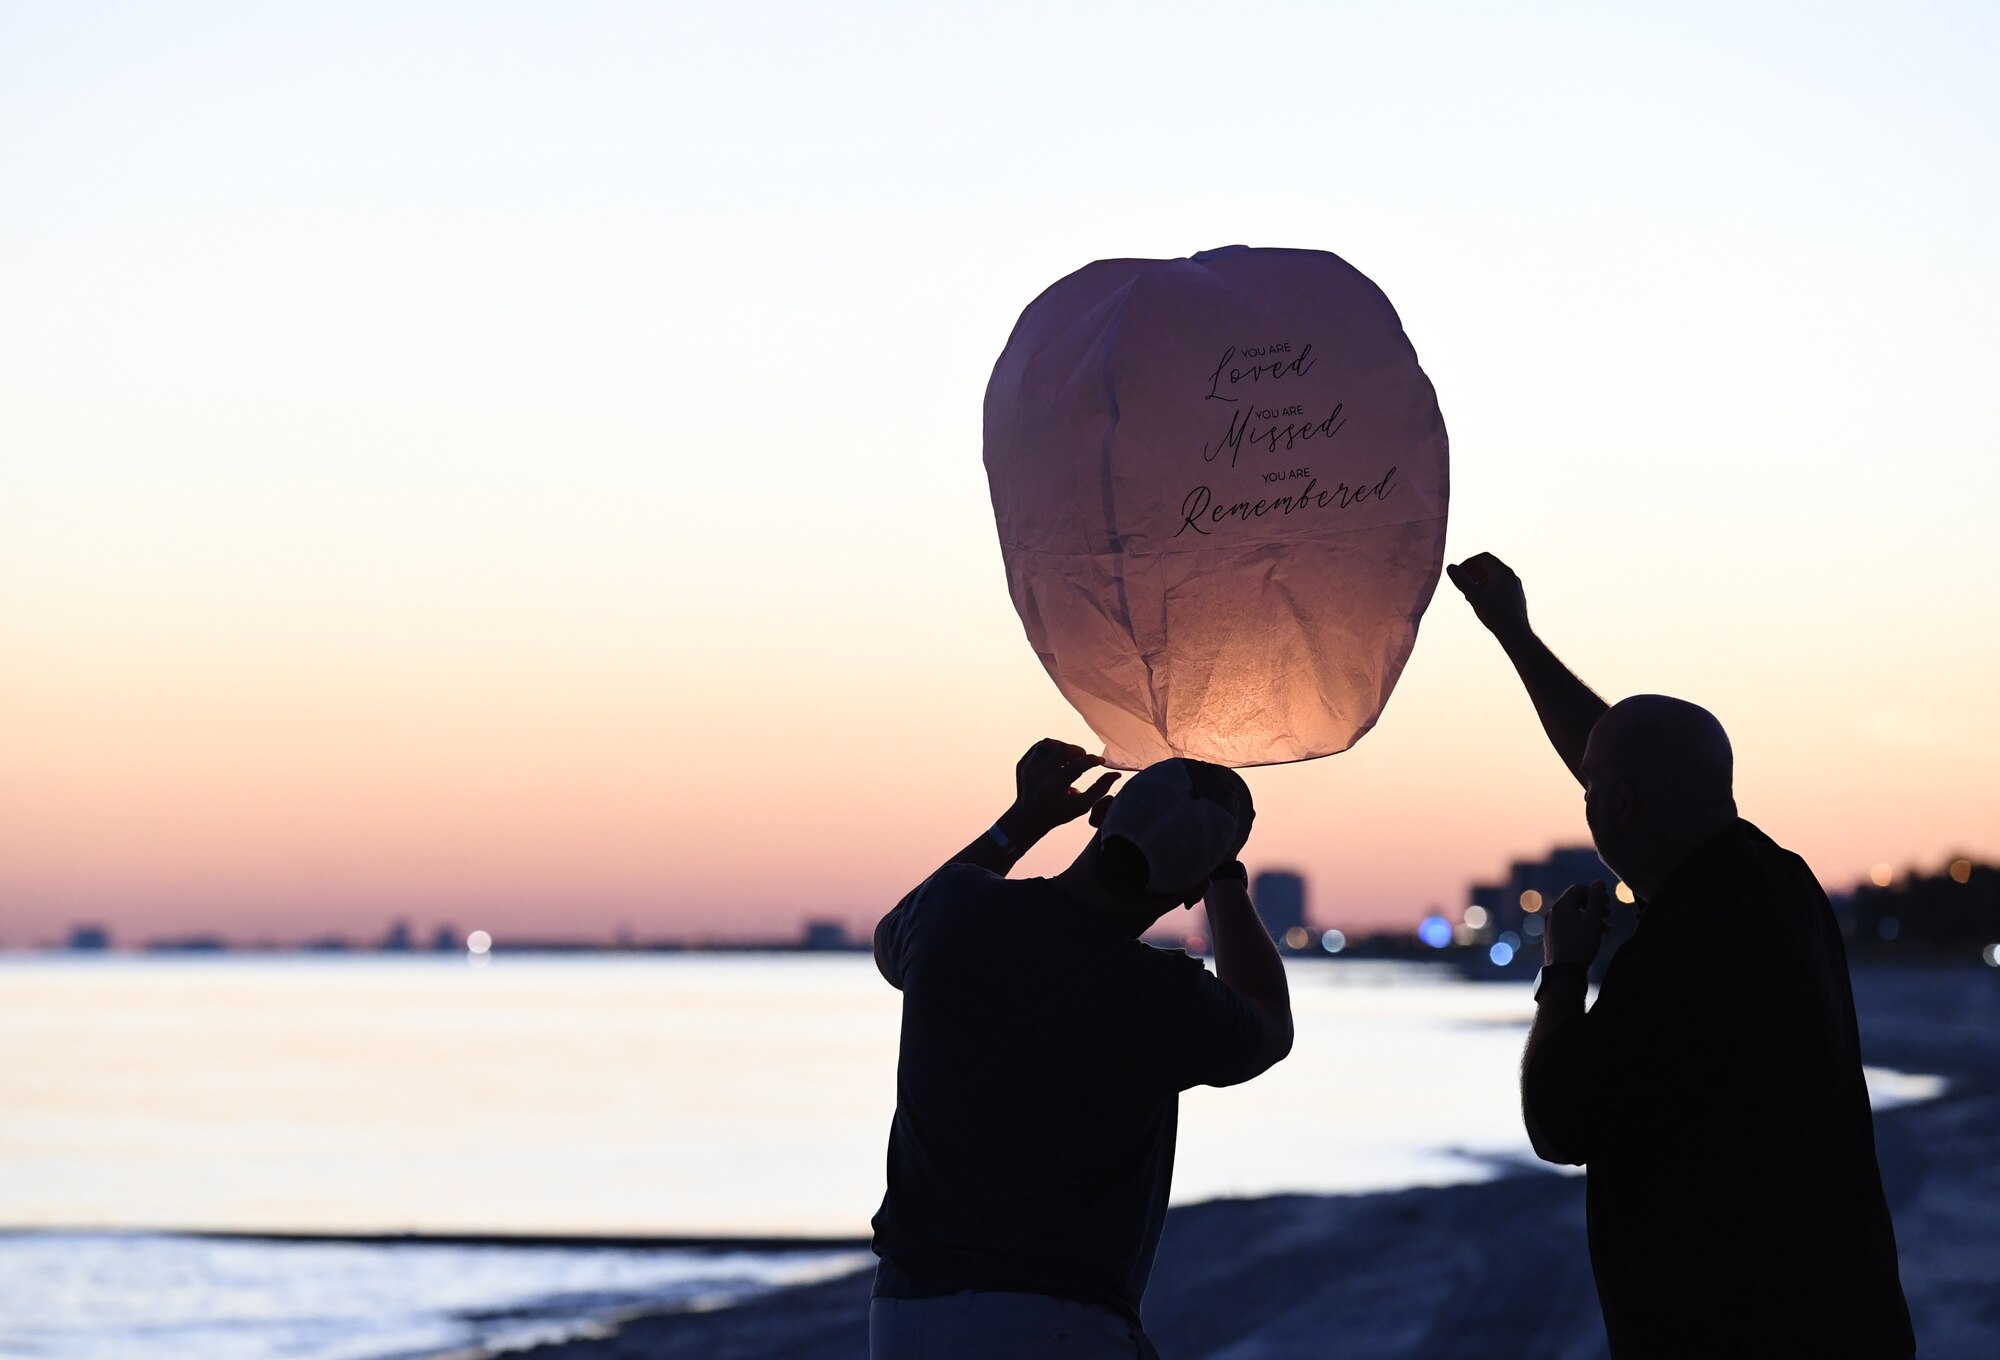 Military family members release a lantern during the Air Force Families Forever Fallen Hero Sky Lantern Lighting on the Biloxi Beach, Mississippi, Sept. 24, 2021. The event, hosted by Keesler Air Force Base, included eco-friendly sky lanterns released in honor of fallen heroes. (U.S. Air Force photo by Kemberly Groue)